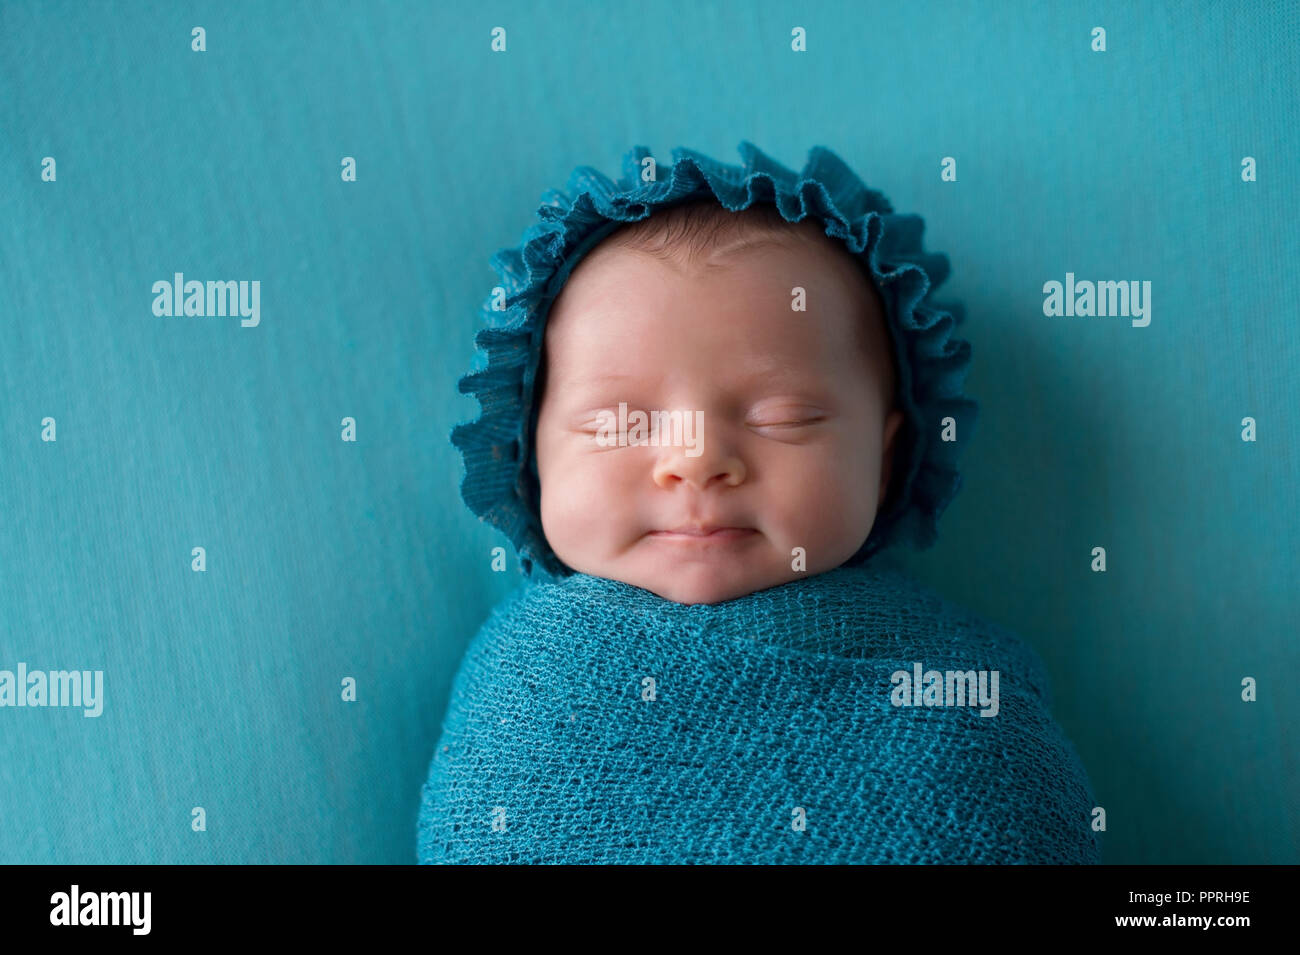 A smiling, three week old, newborn baby girl wearing a bonnet and bundled up in a turquoise blue swaddle. Stock Photo